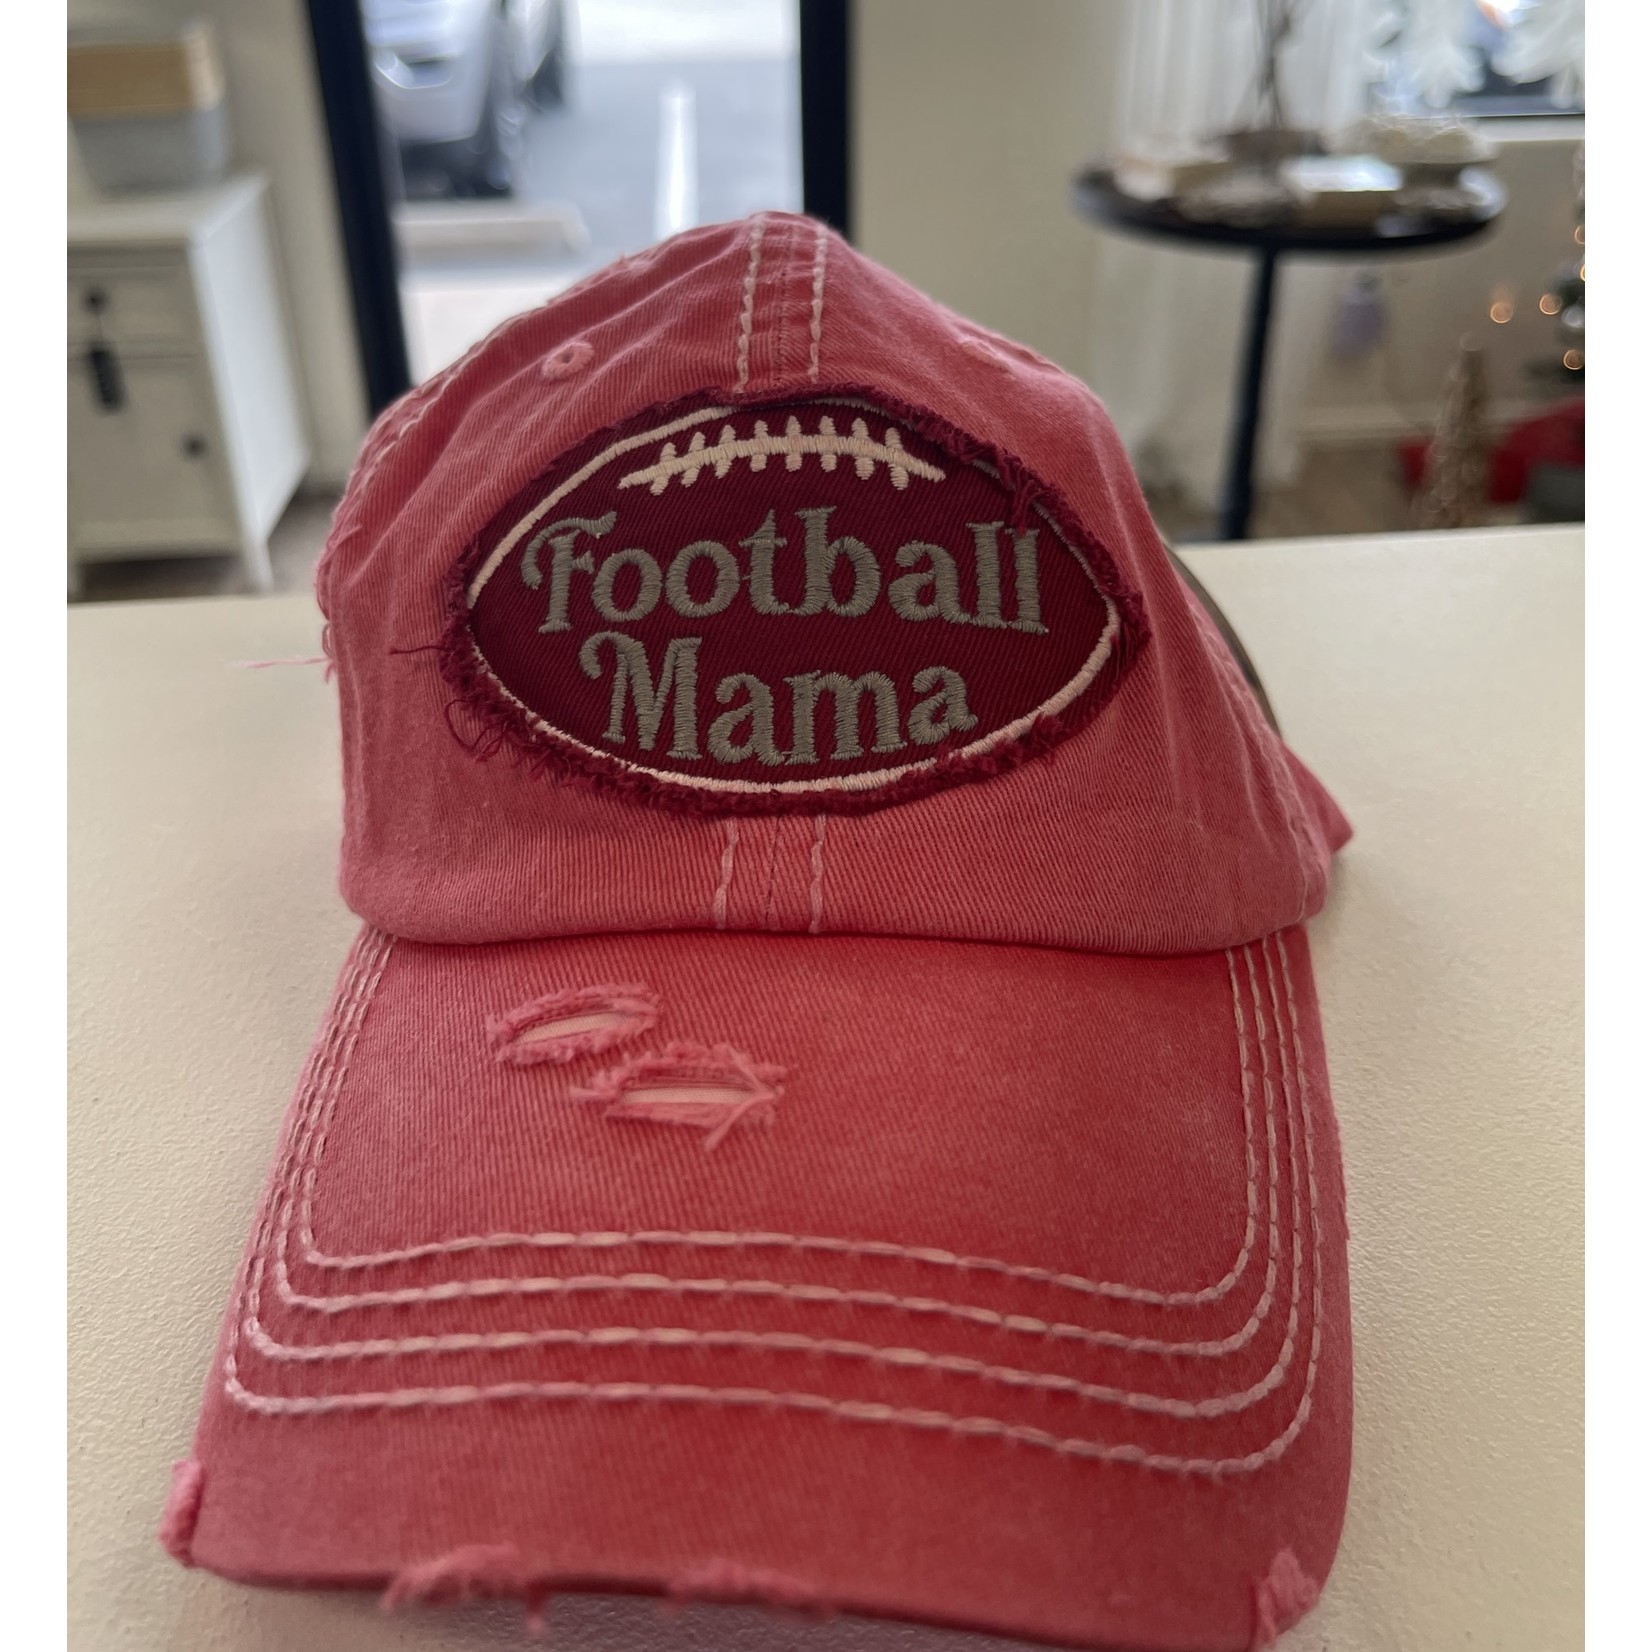 Hana / Faire Football Mama Hat w/ Velcro Closing - Red and White